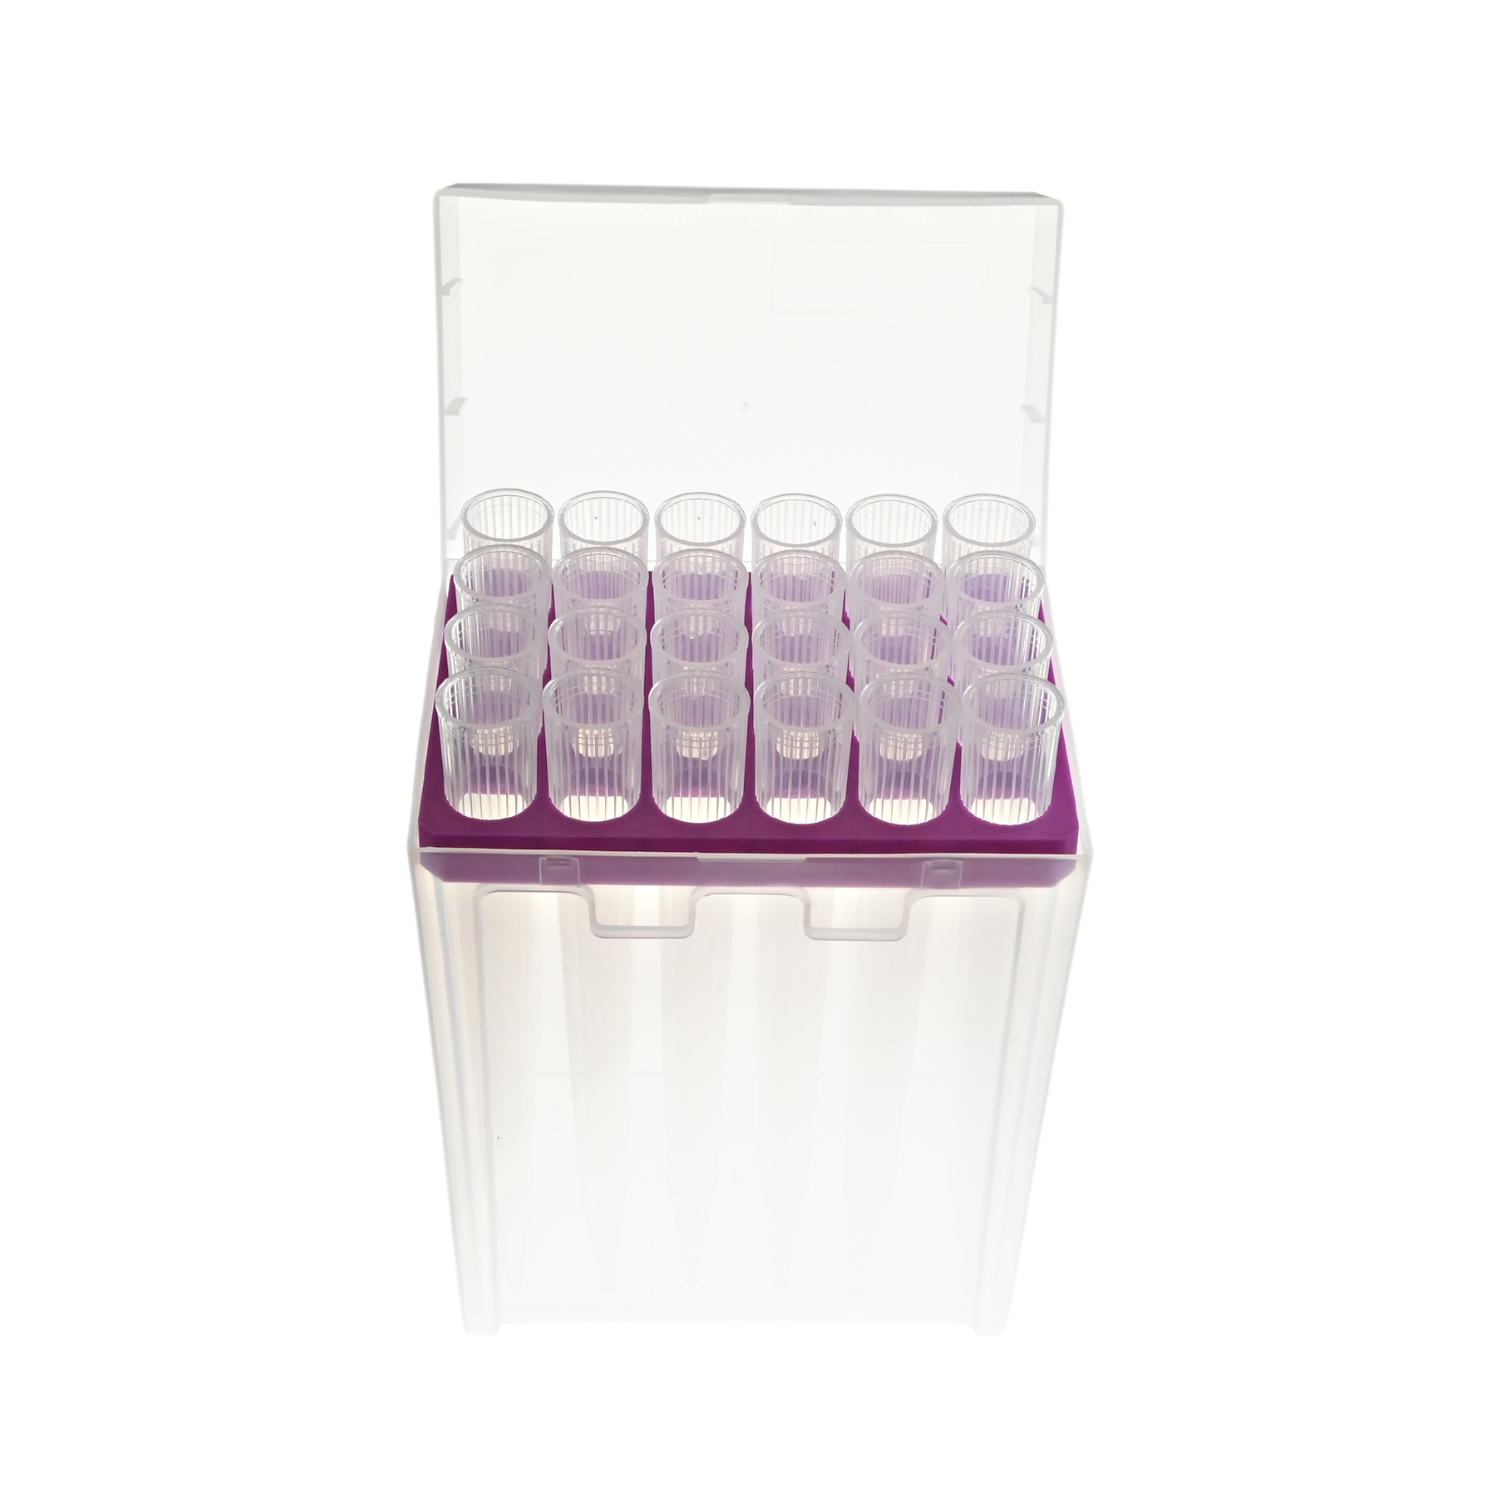 10ml pipette tips-1